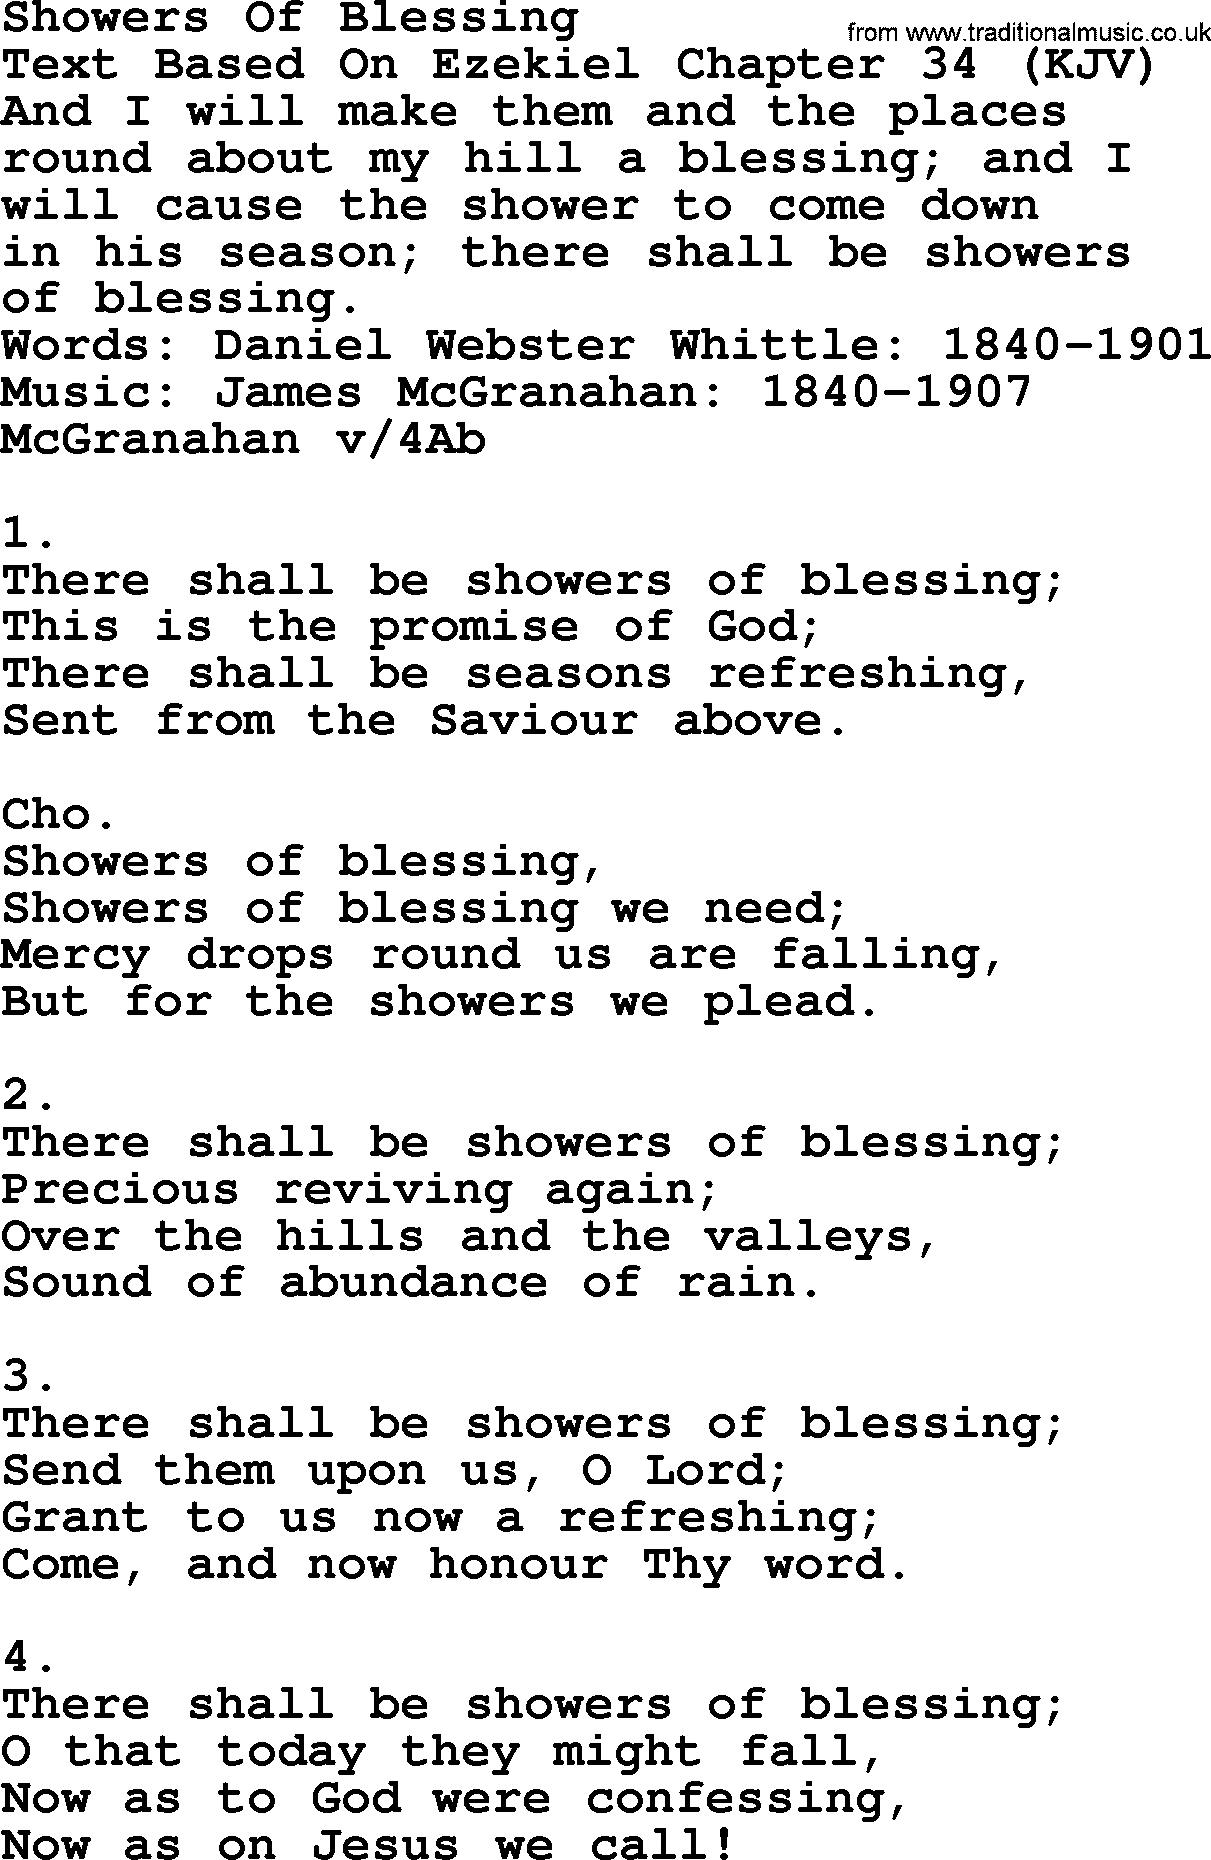 Apostolic & Pentecostal Hymns and Songs, Hymn: Showers Of Blessing lyrics and PDF